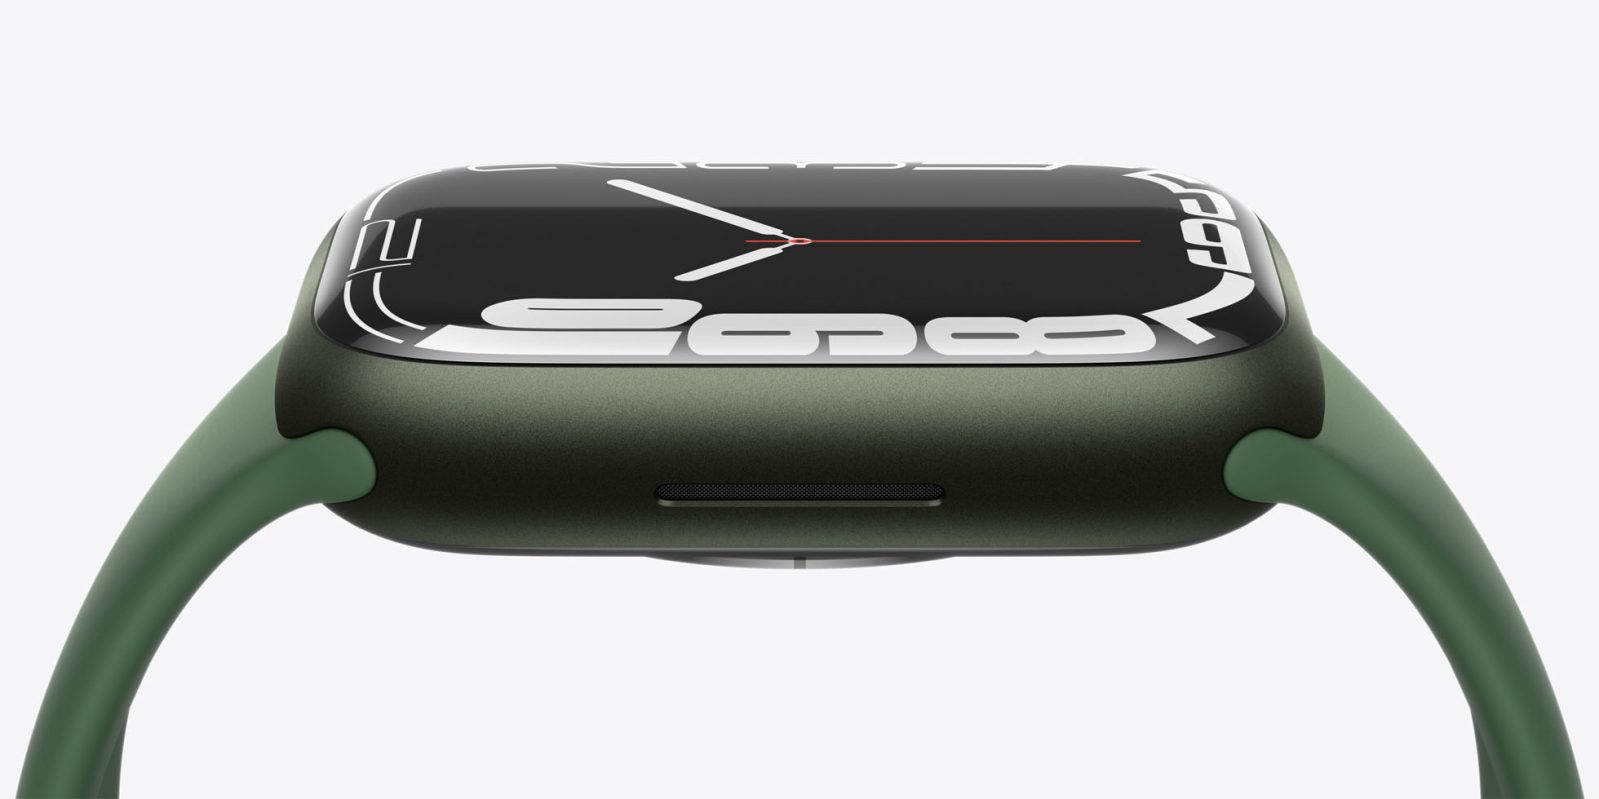 Apple Watch Series 7 orders start on Friday October 8